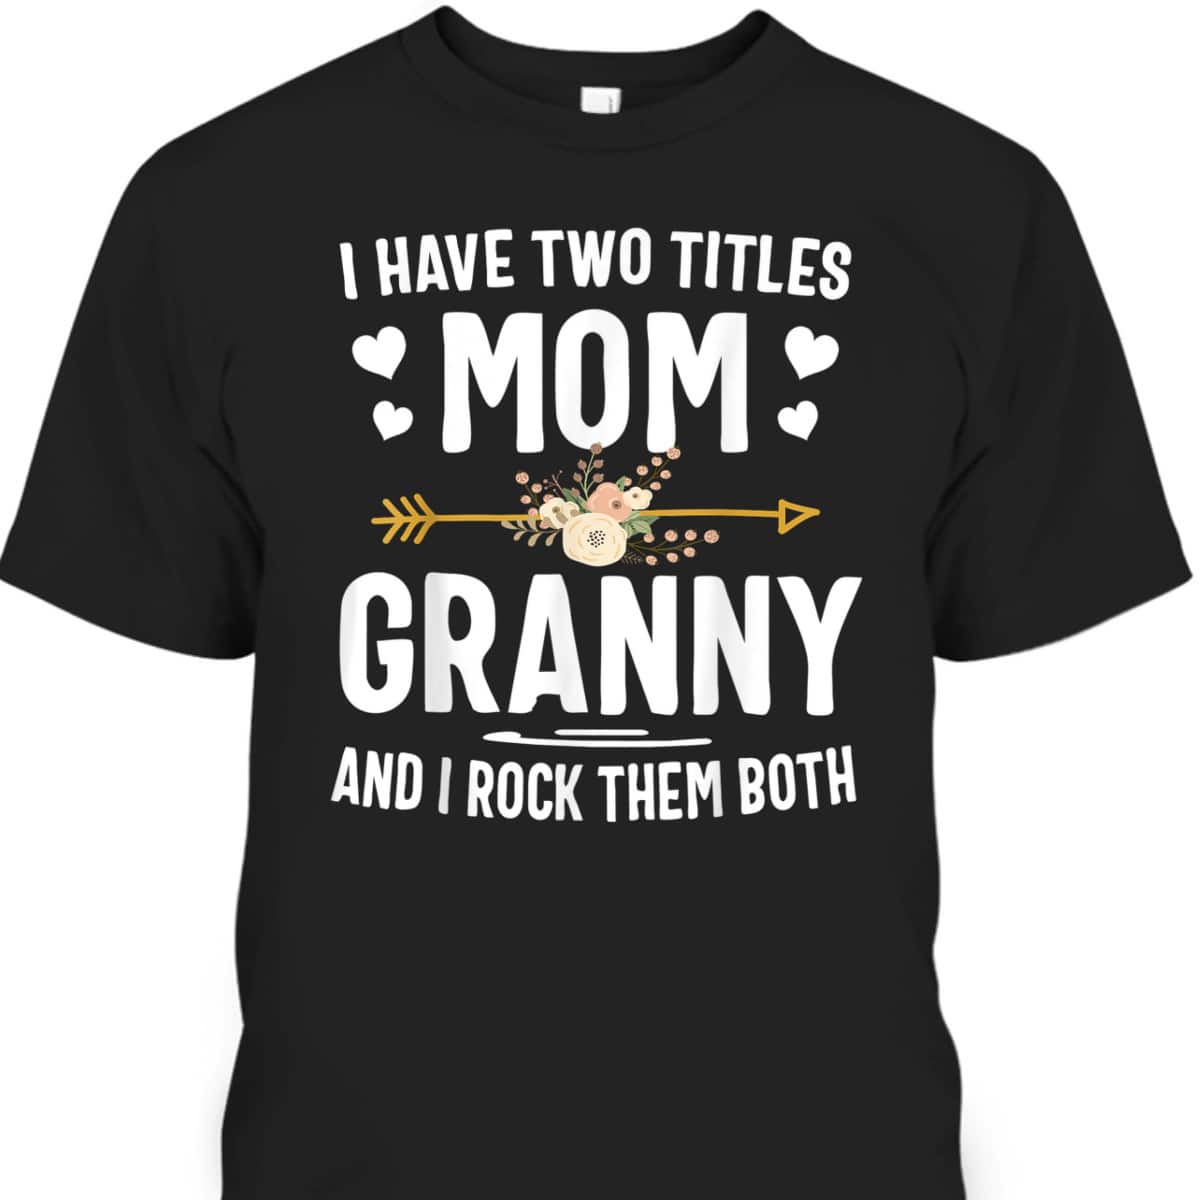 Mother's Day T-Shirt I Have Two Titles Mom And Granny Mother's Day Gift